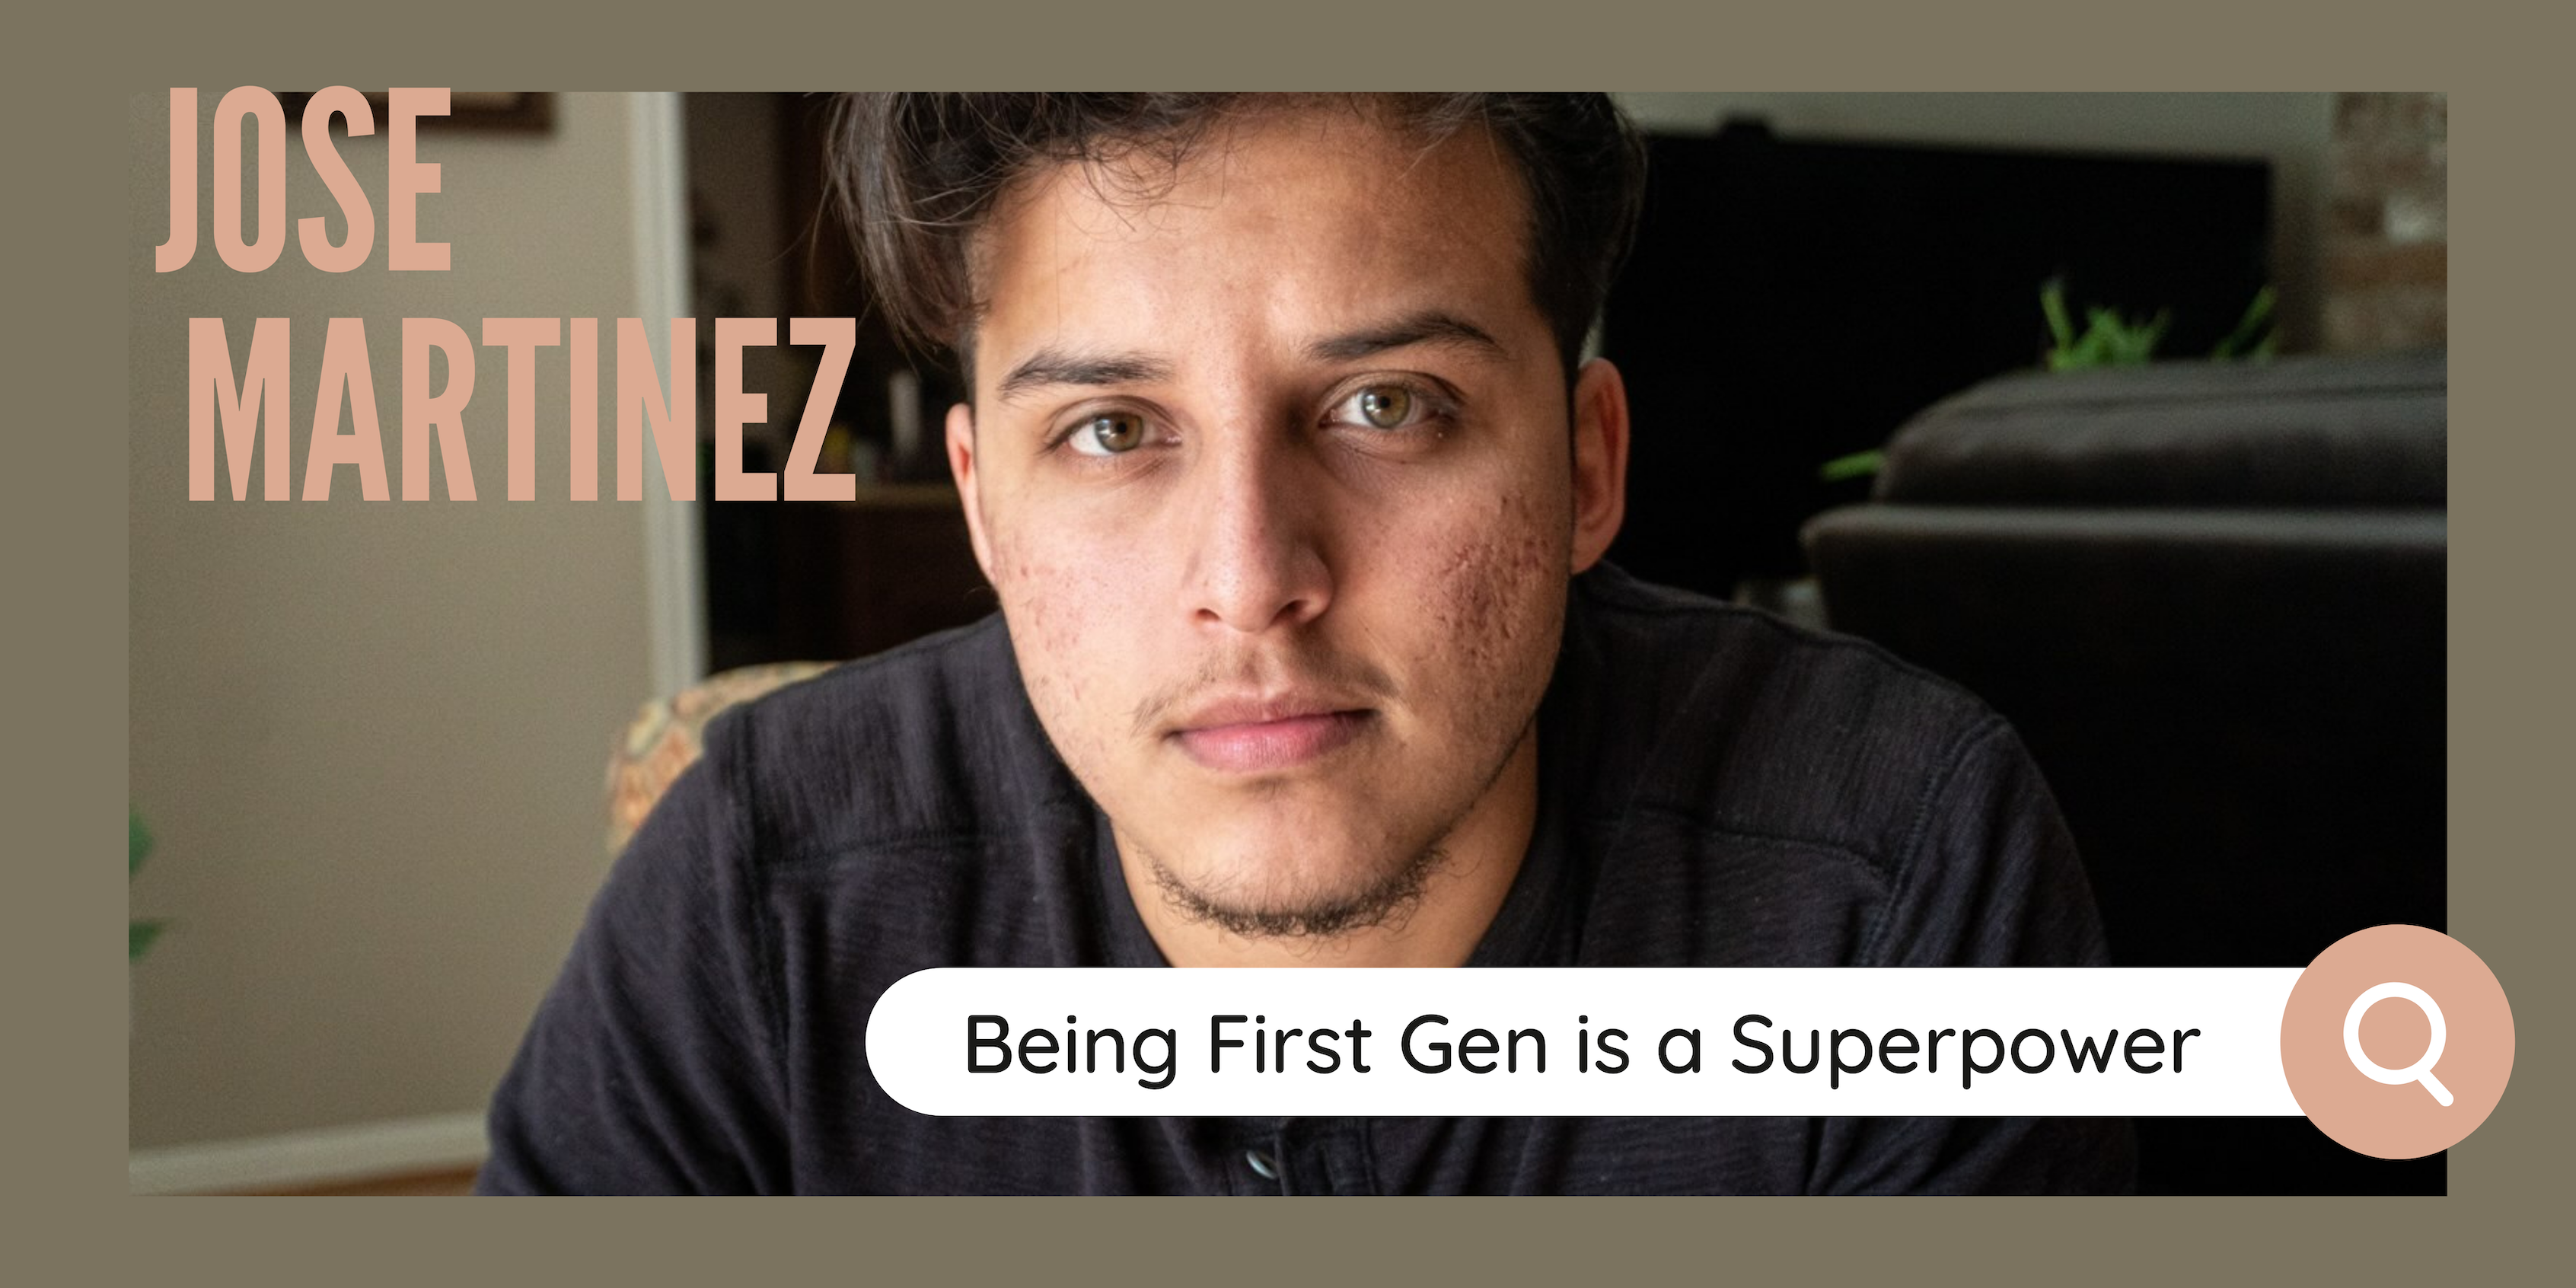 Picture of Jose Martinez in front of an olive green background. At the top left is the text, "JOSE MARTINEZ" in pink. At the bottom right is a search bar with text that says, "Being First Gen is a Superpower."